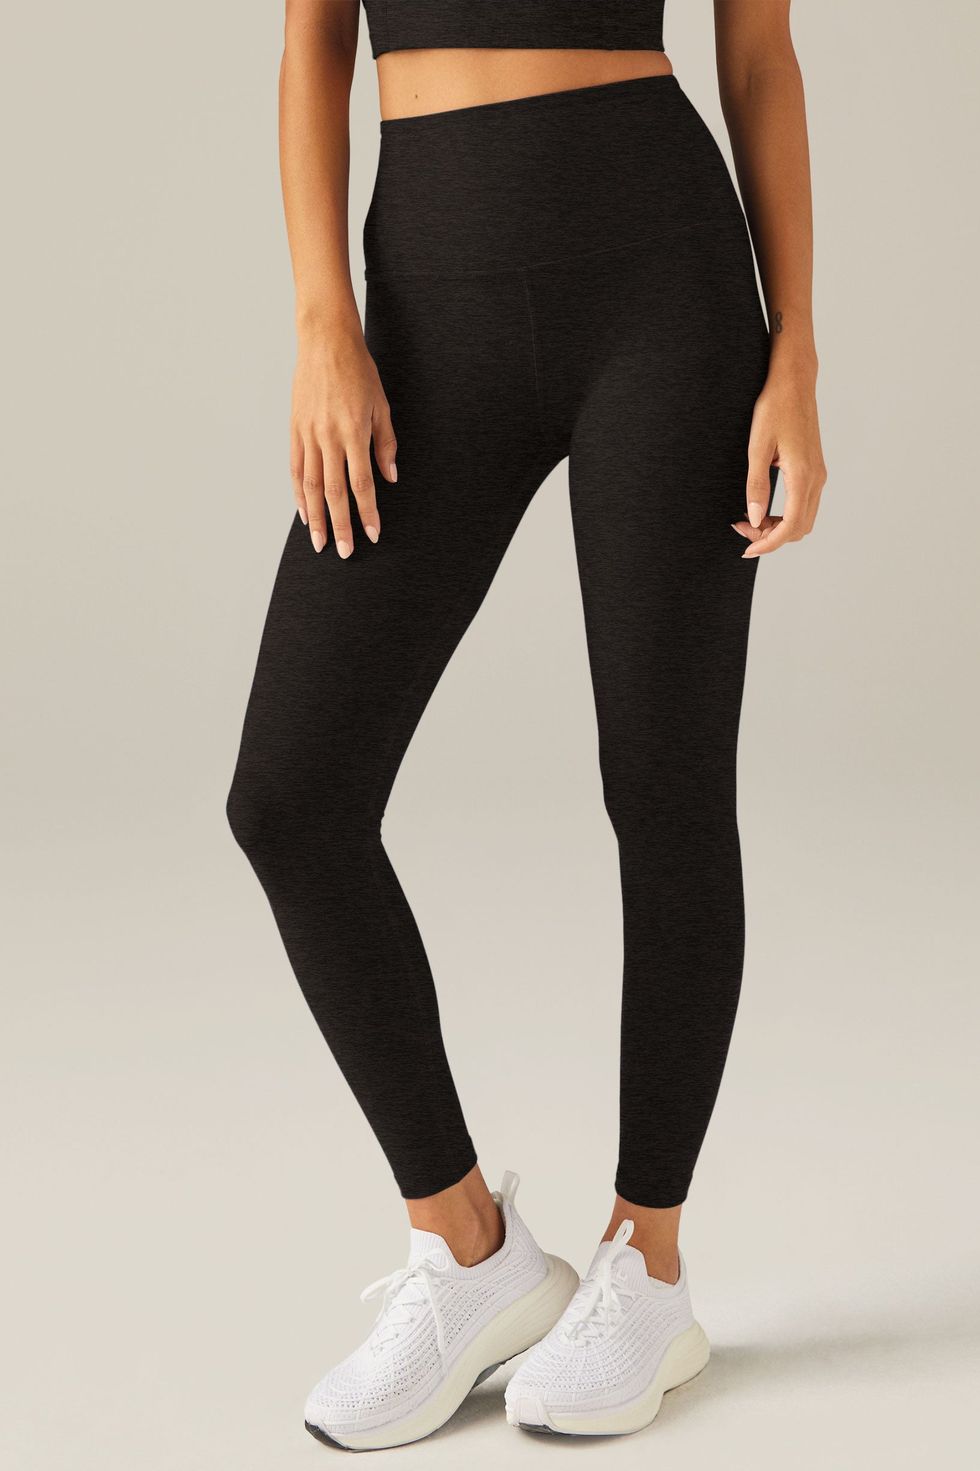 Best Leggings With Pockets: Why Old Navy High-Waist Leggings Are